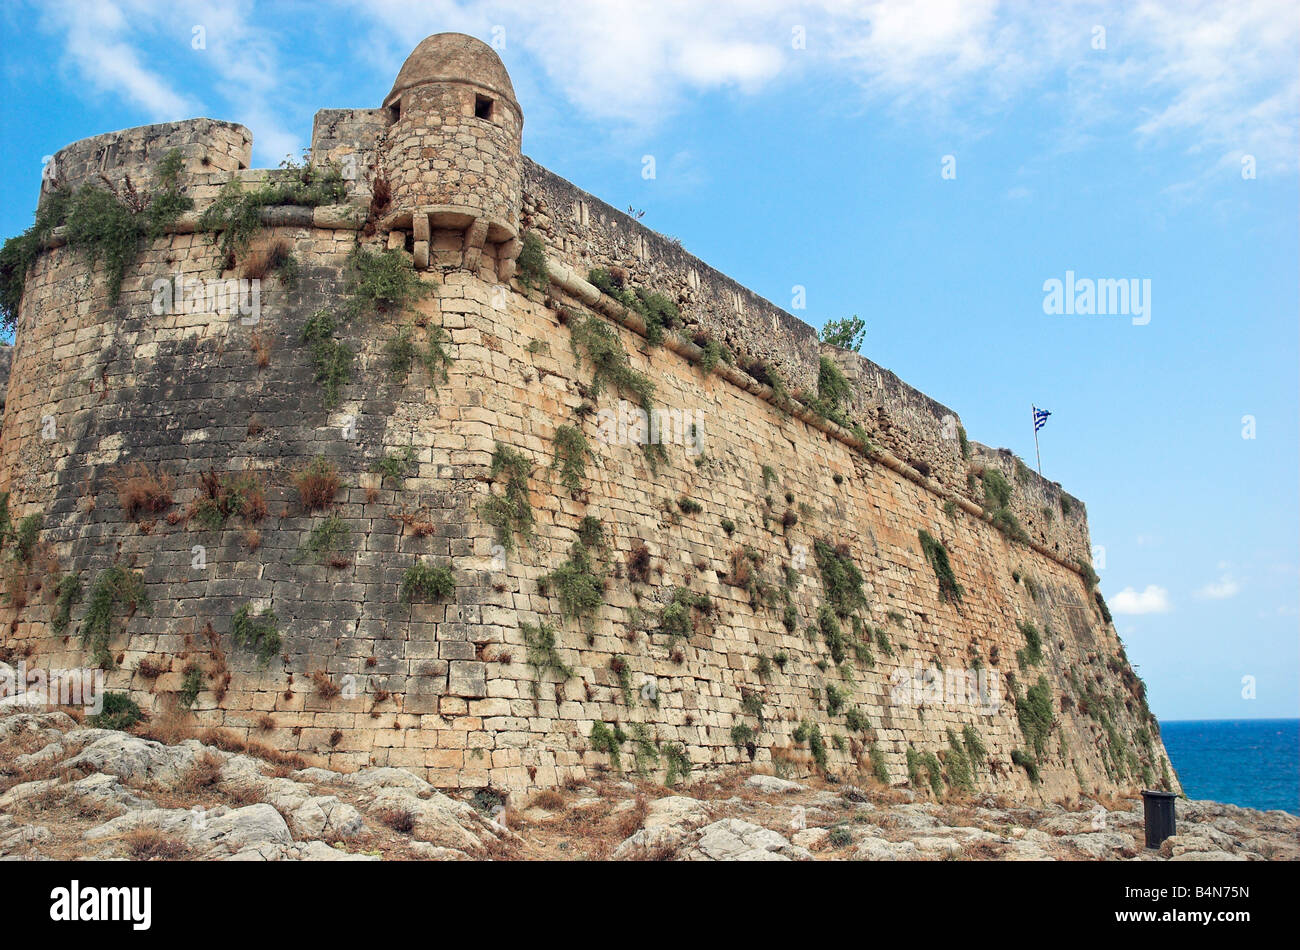 The Venetian Fortress or Fortezza in Rethymnon Crete Greece September 2008 Stock Photo